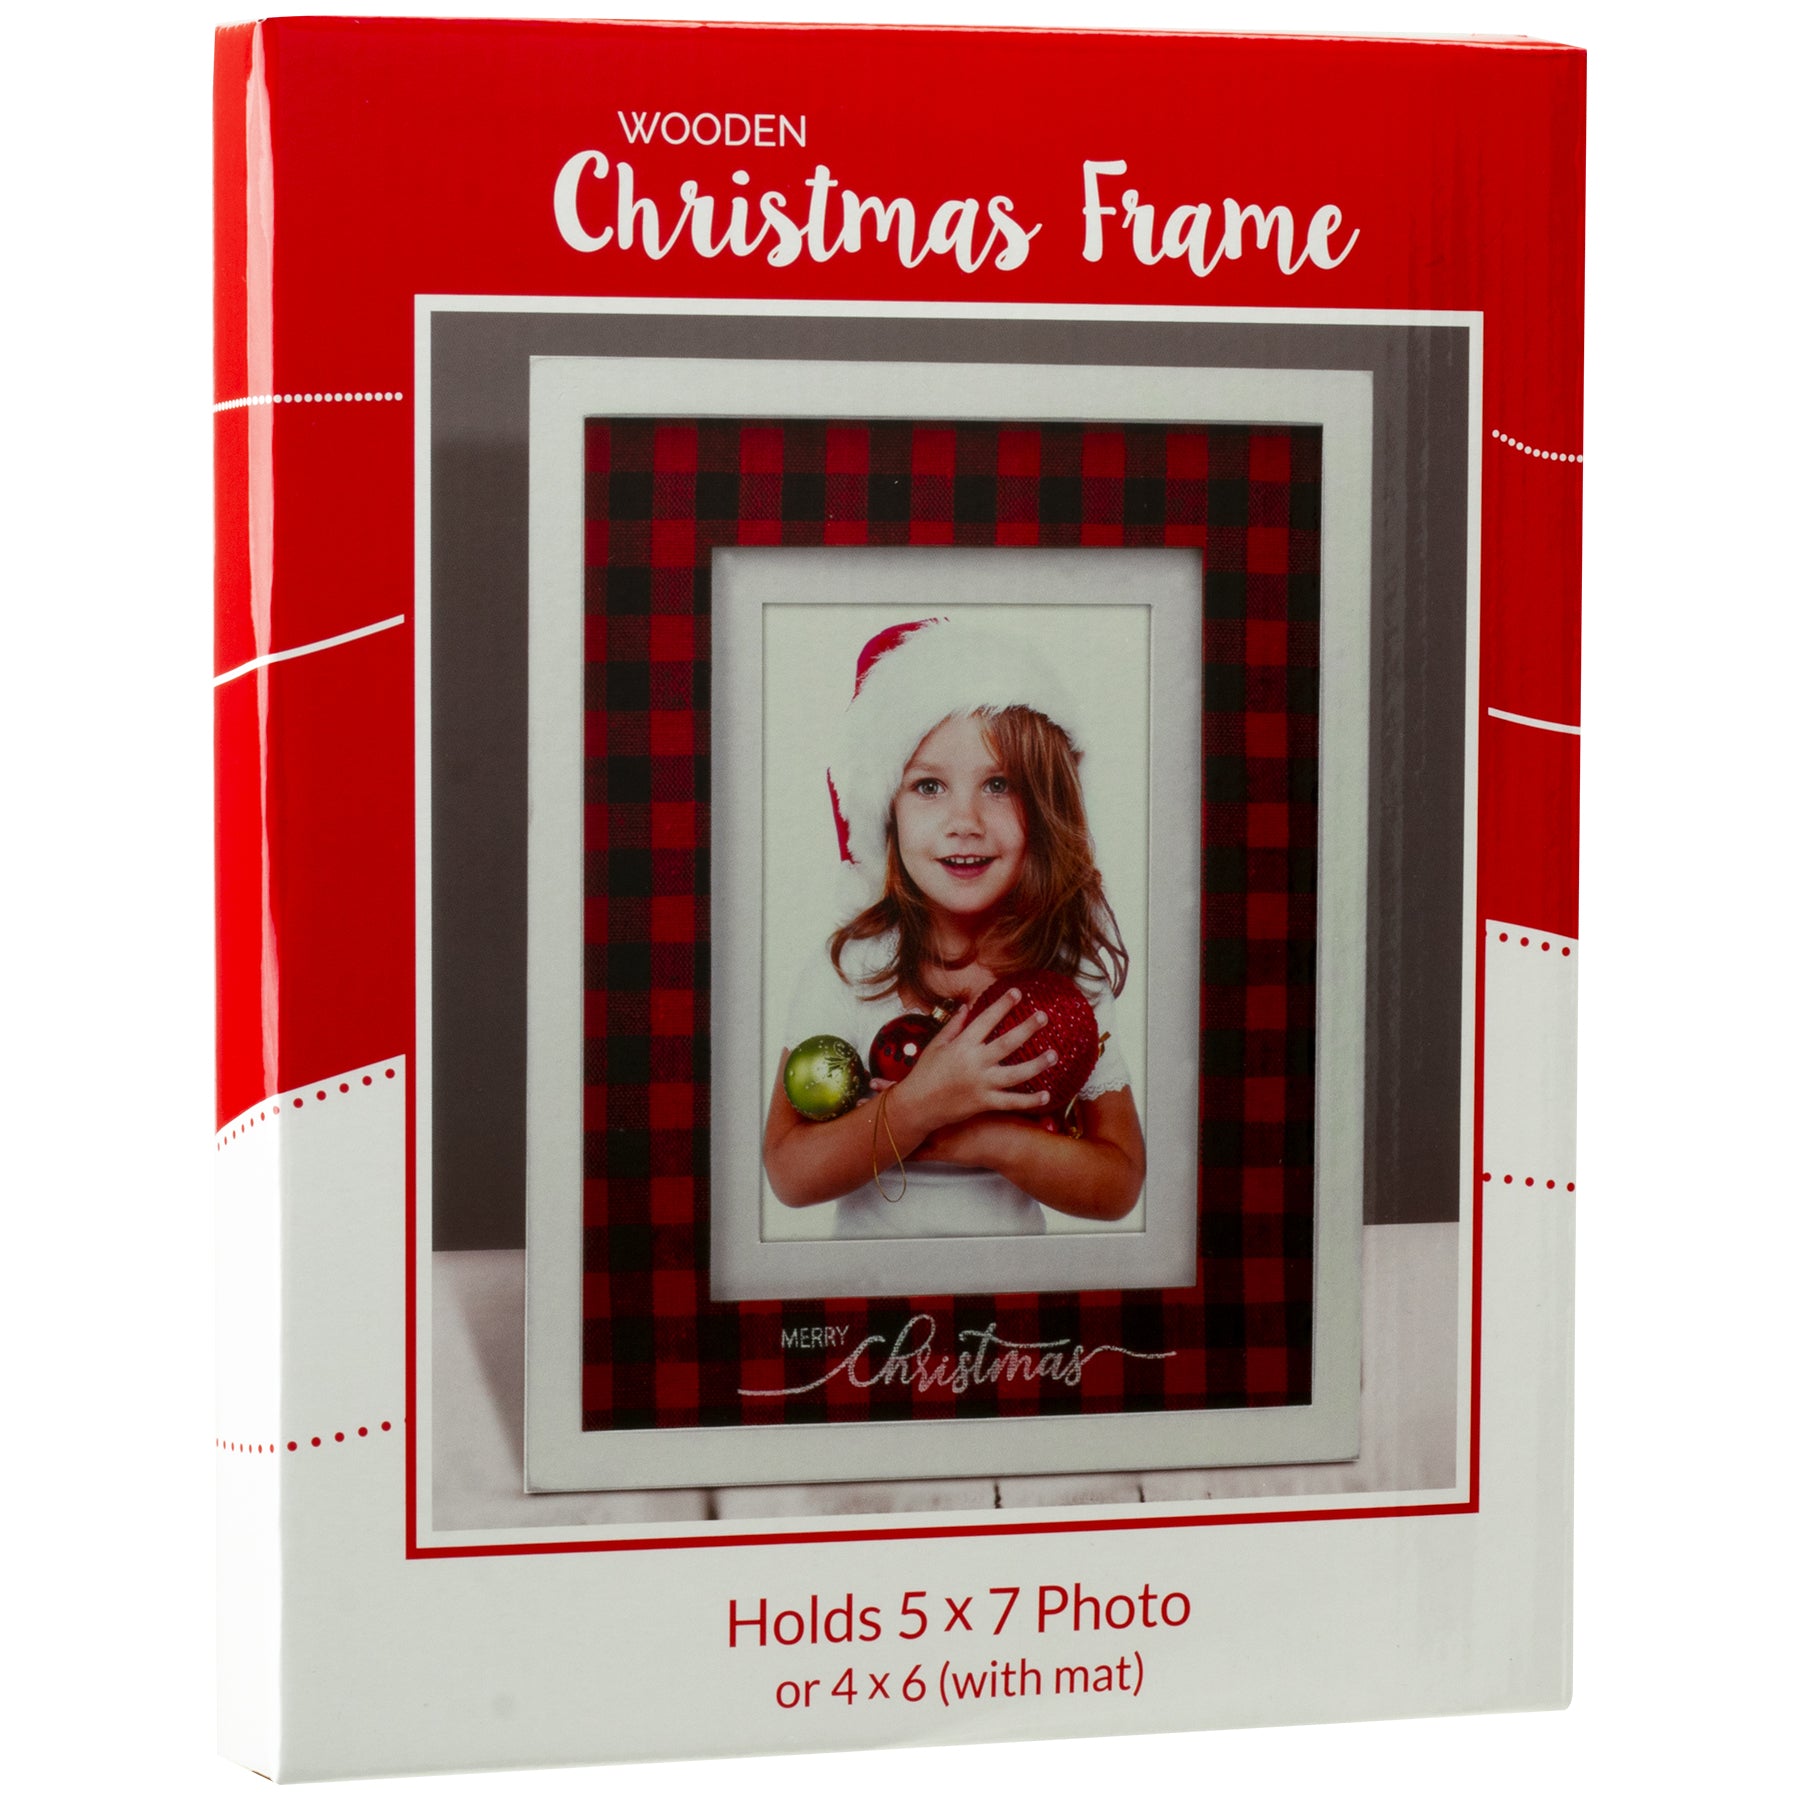 Merry Christmas Plaid Picture Frame